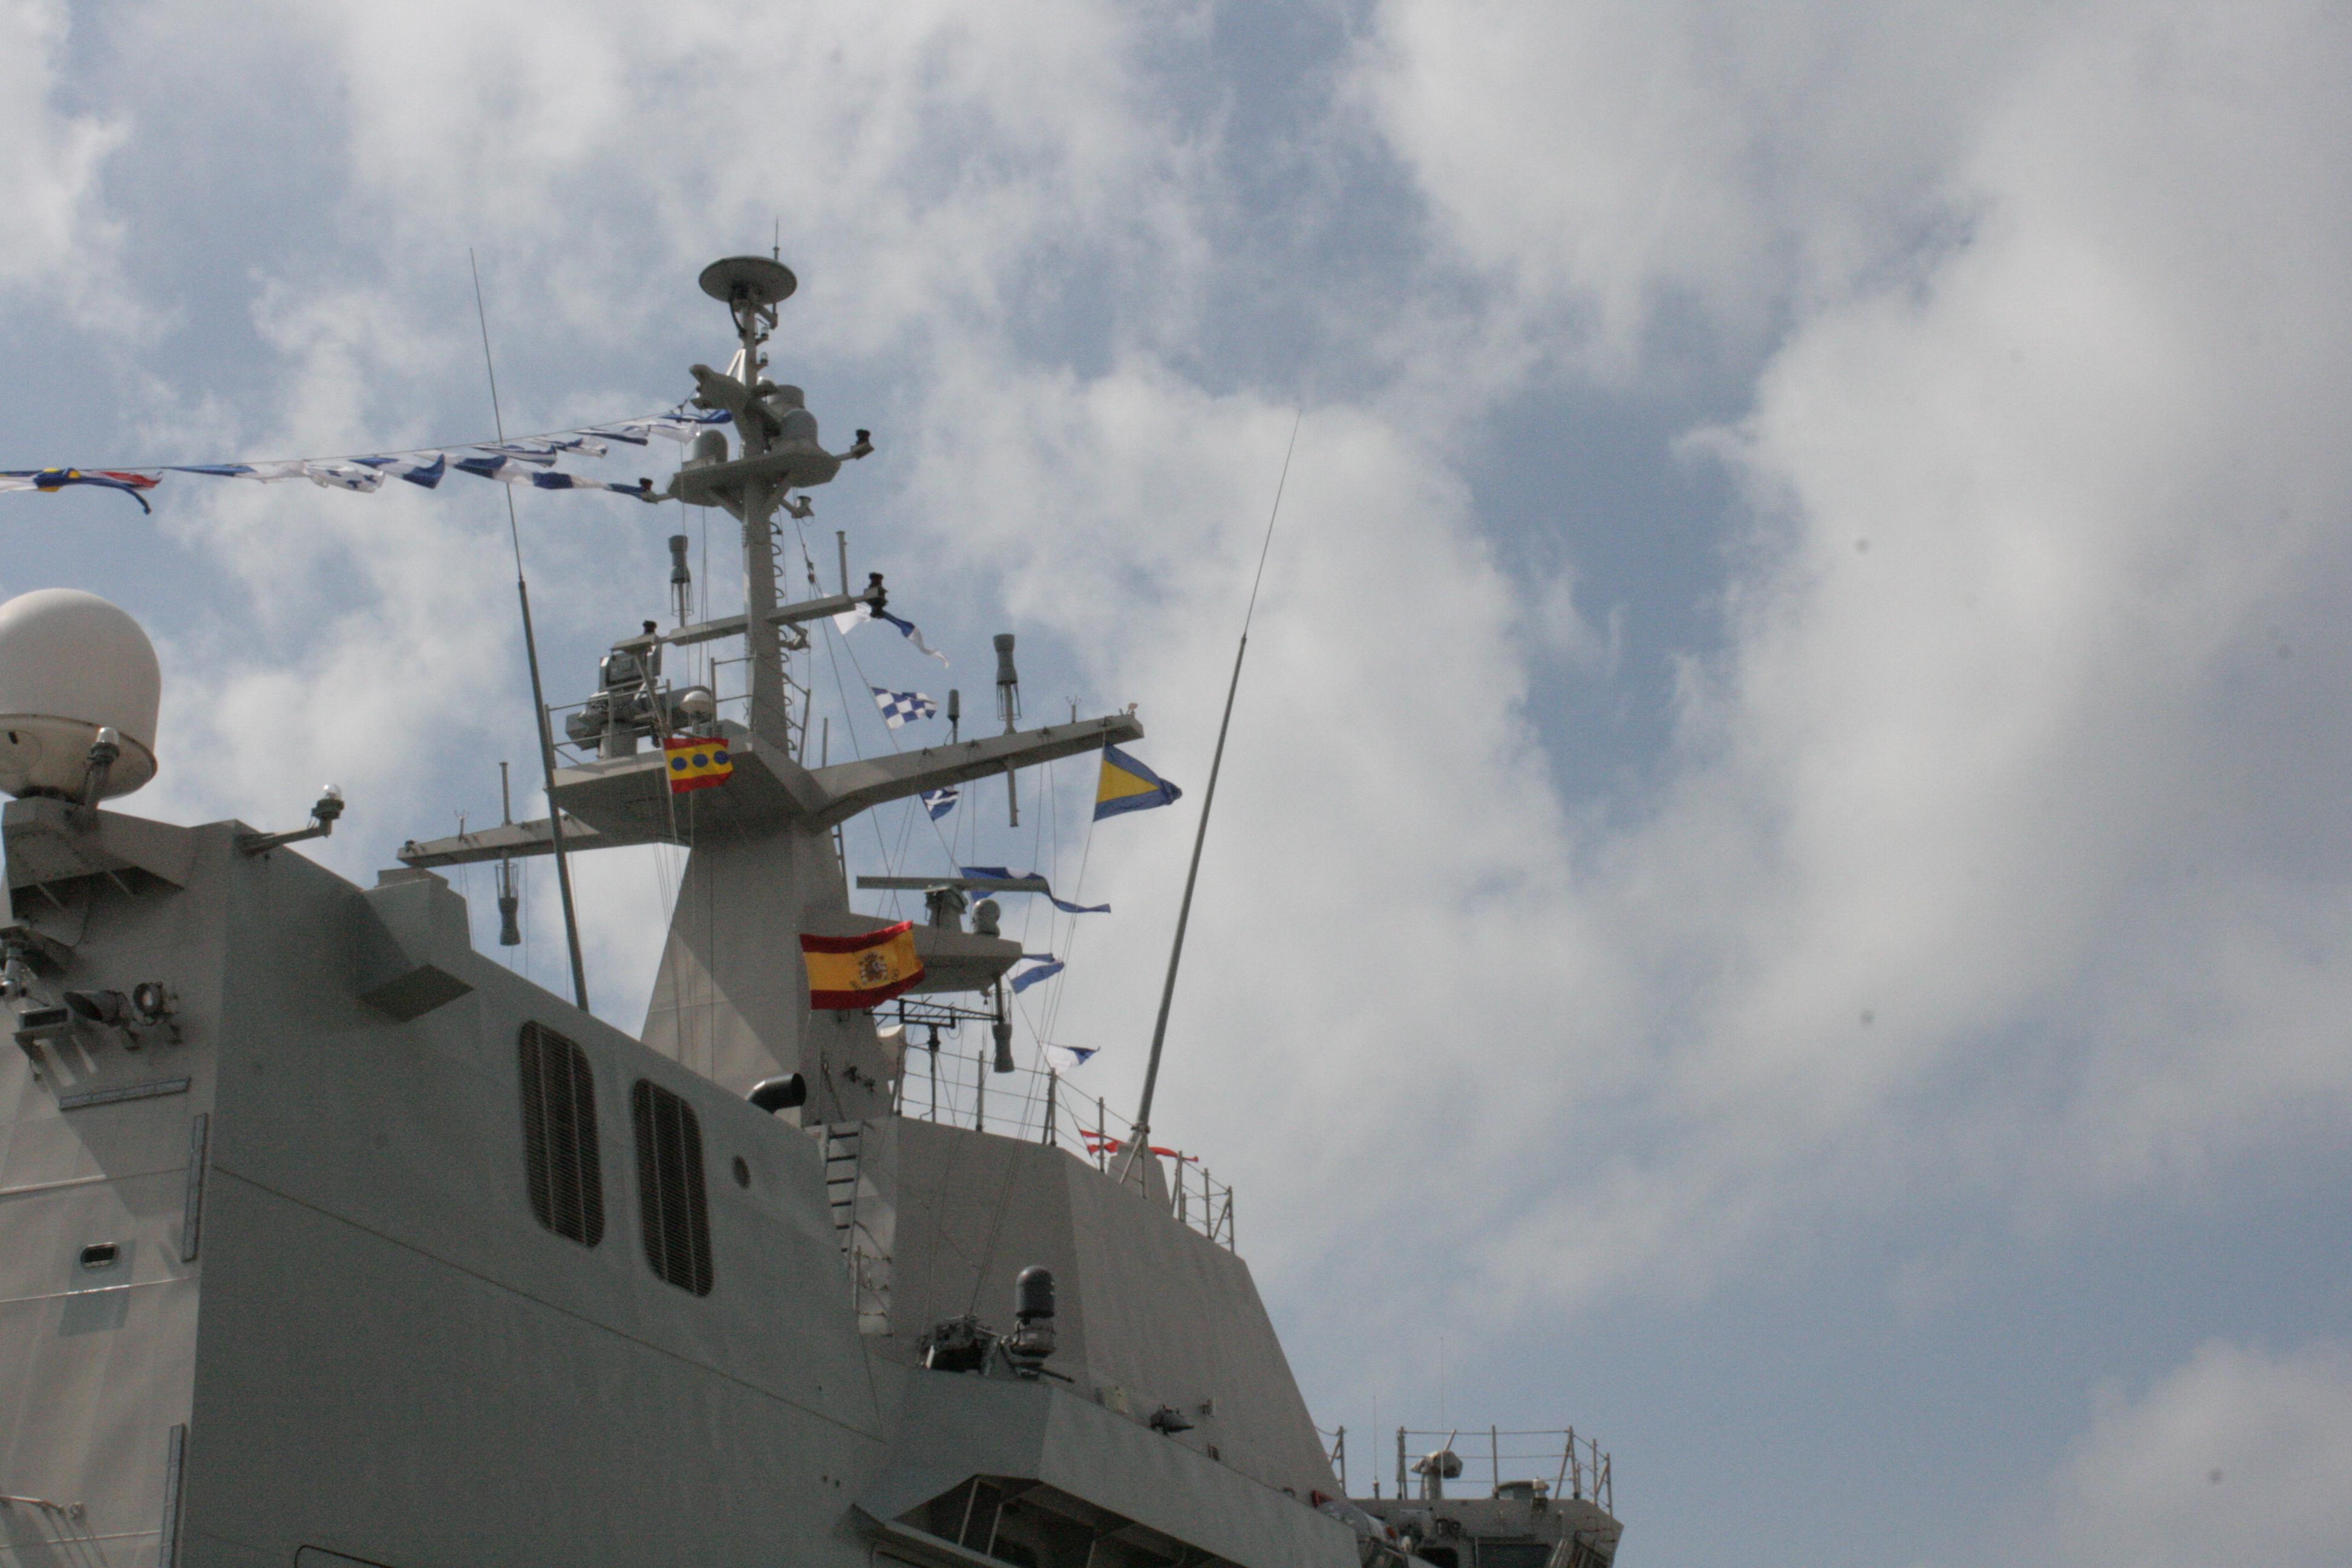 The Battle Ensign flying on board the Spanish Navy vessel.